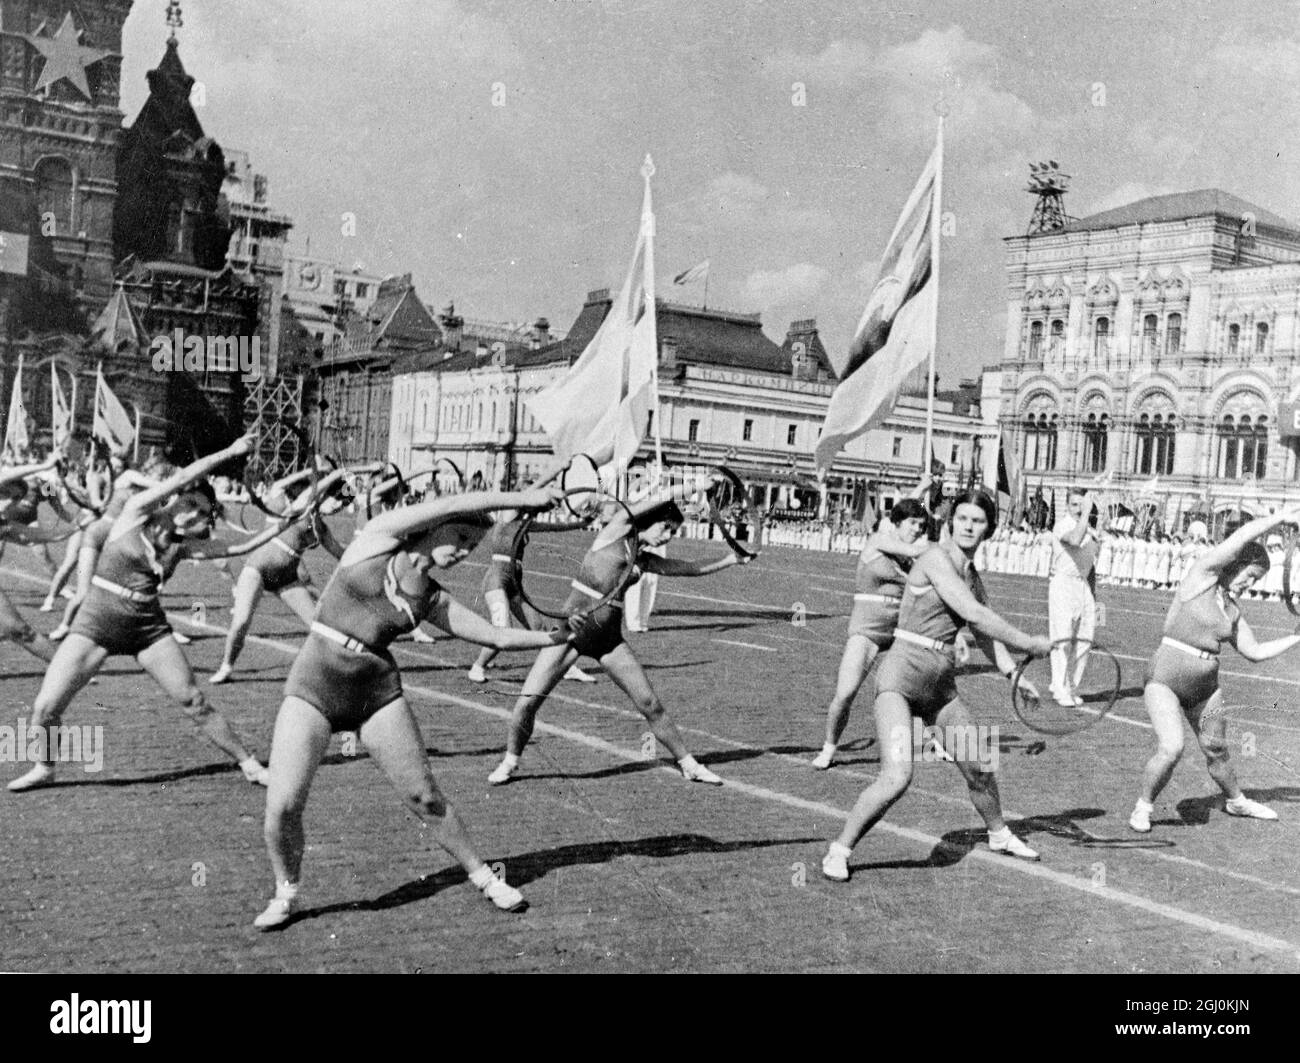 A million young athletes, drawn from all sports societies in all parts of the Soviet Union, paraded before Stalin and his chief ministers on the 23rd International Youth Day in Moscow Children from Republican Spain also took part in the gigantic display. Girls gymnasts of the Stormy Petrol Sports performing their exercises as they passed through the Red Square. 19 September 1937 Stock Photo